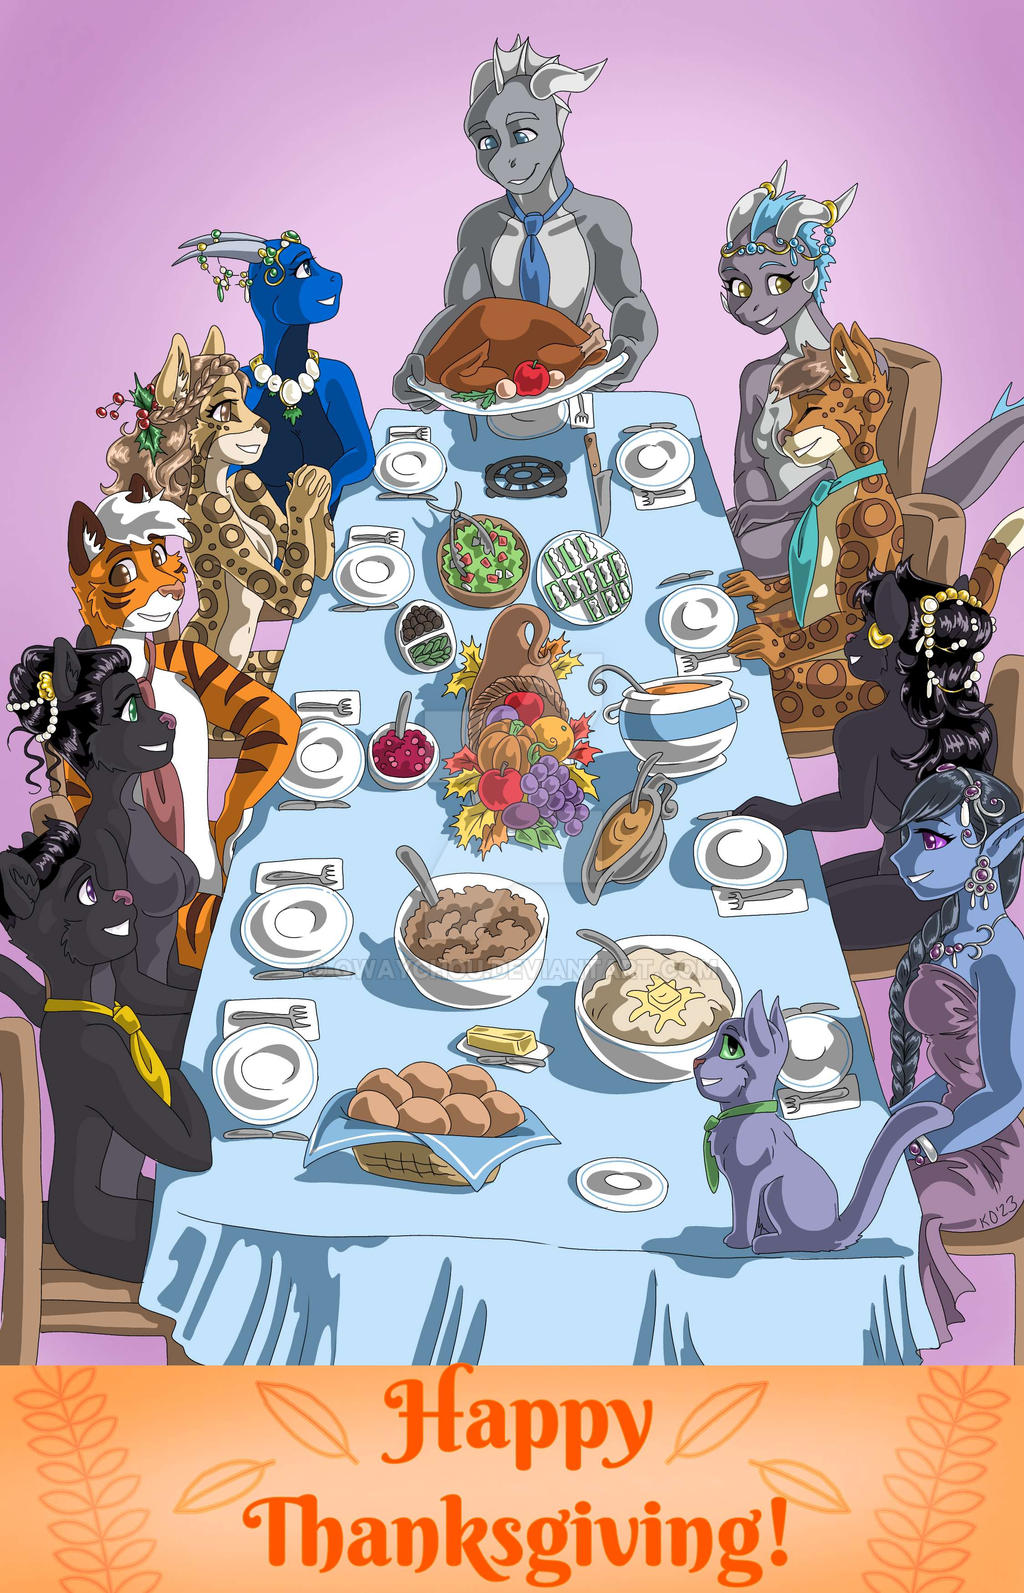 Happy Thanksgiving Day 2023! by AwesomeCraft on DeviantArt